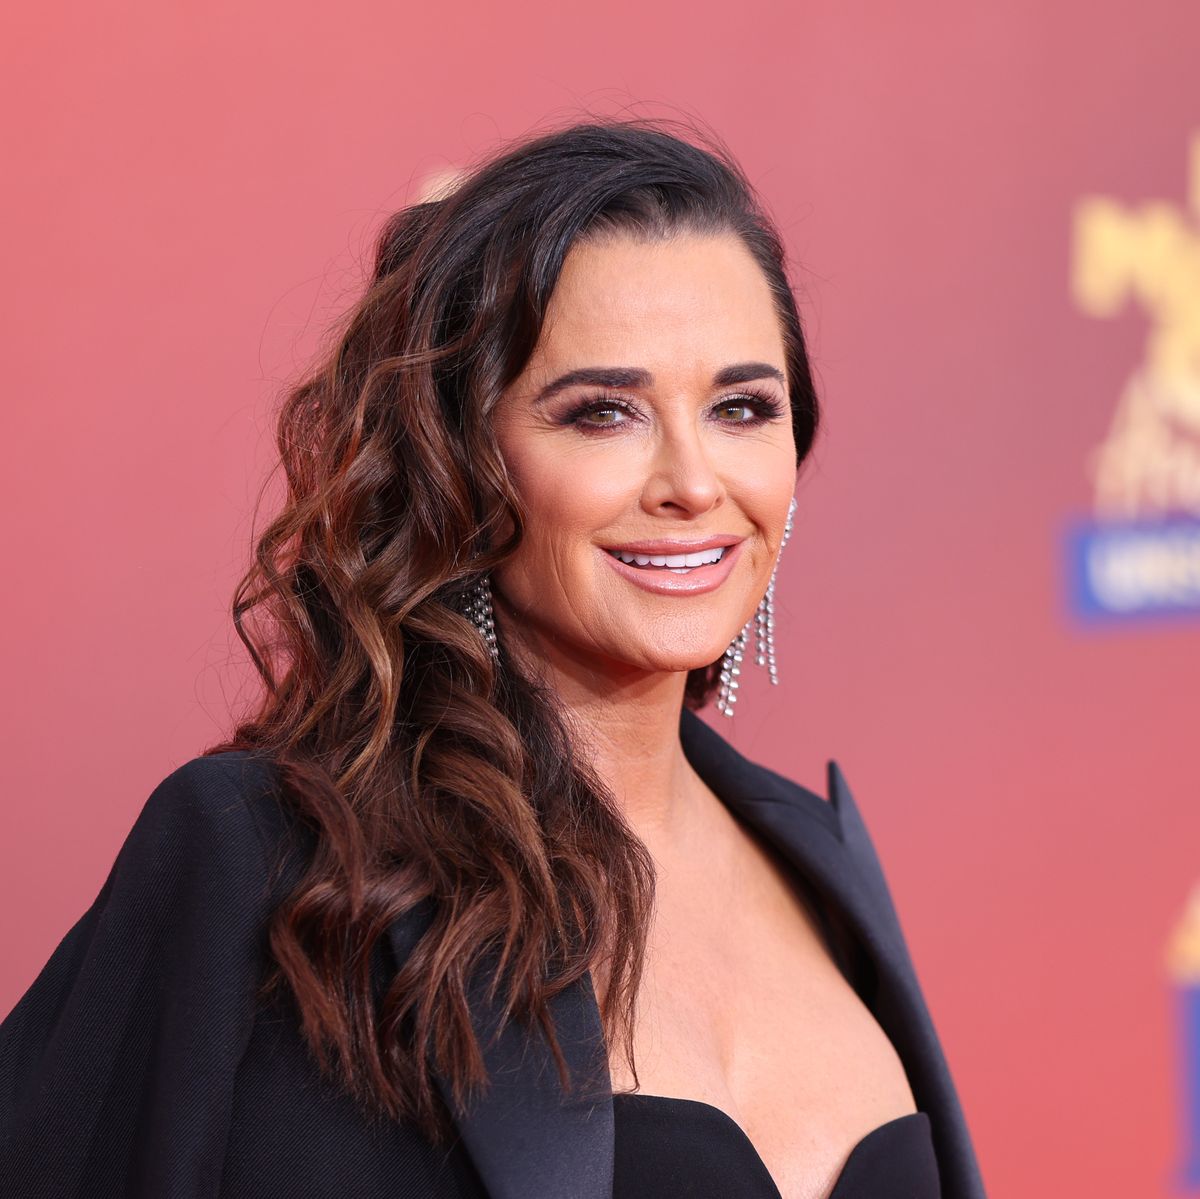 Kyle Richards Shares $13 Trick for 'Fuller, Thicker-Looking' Hair